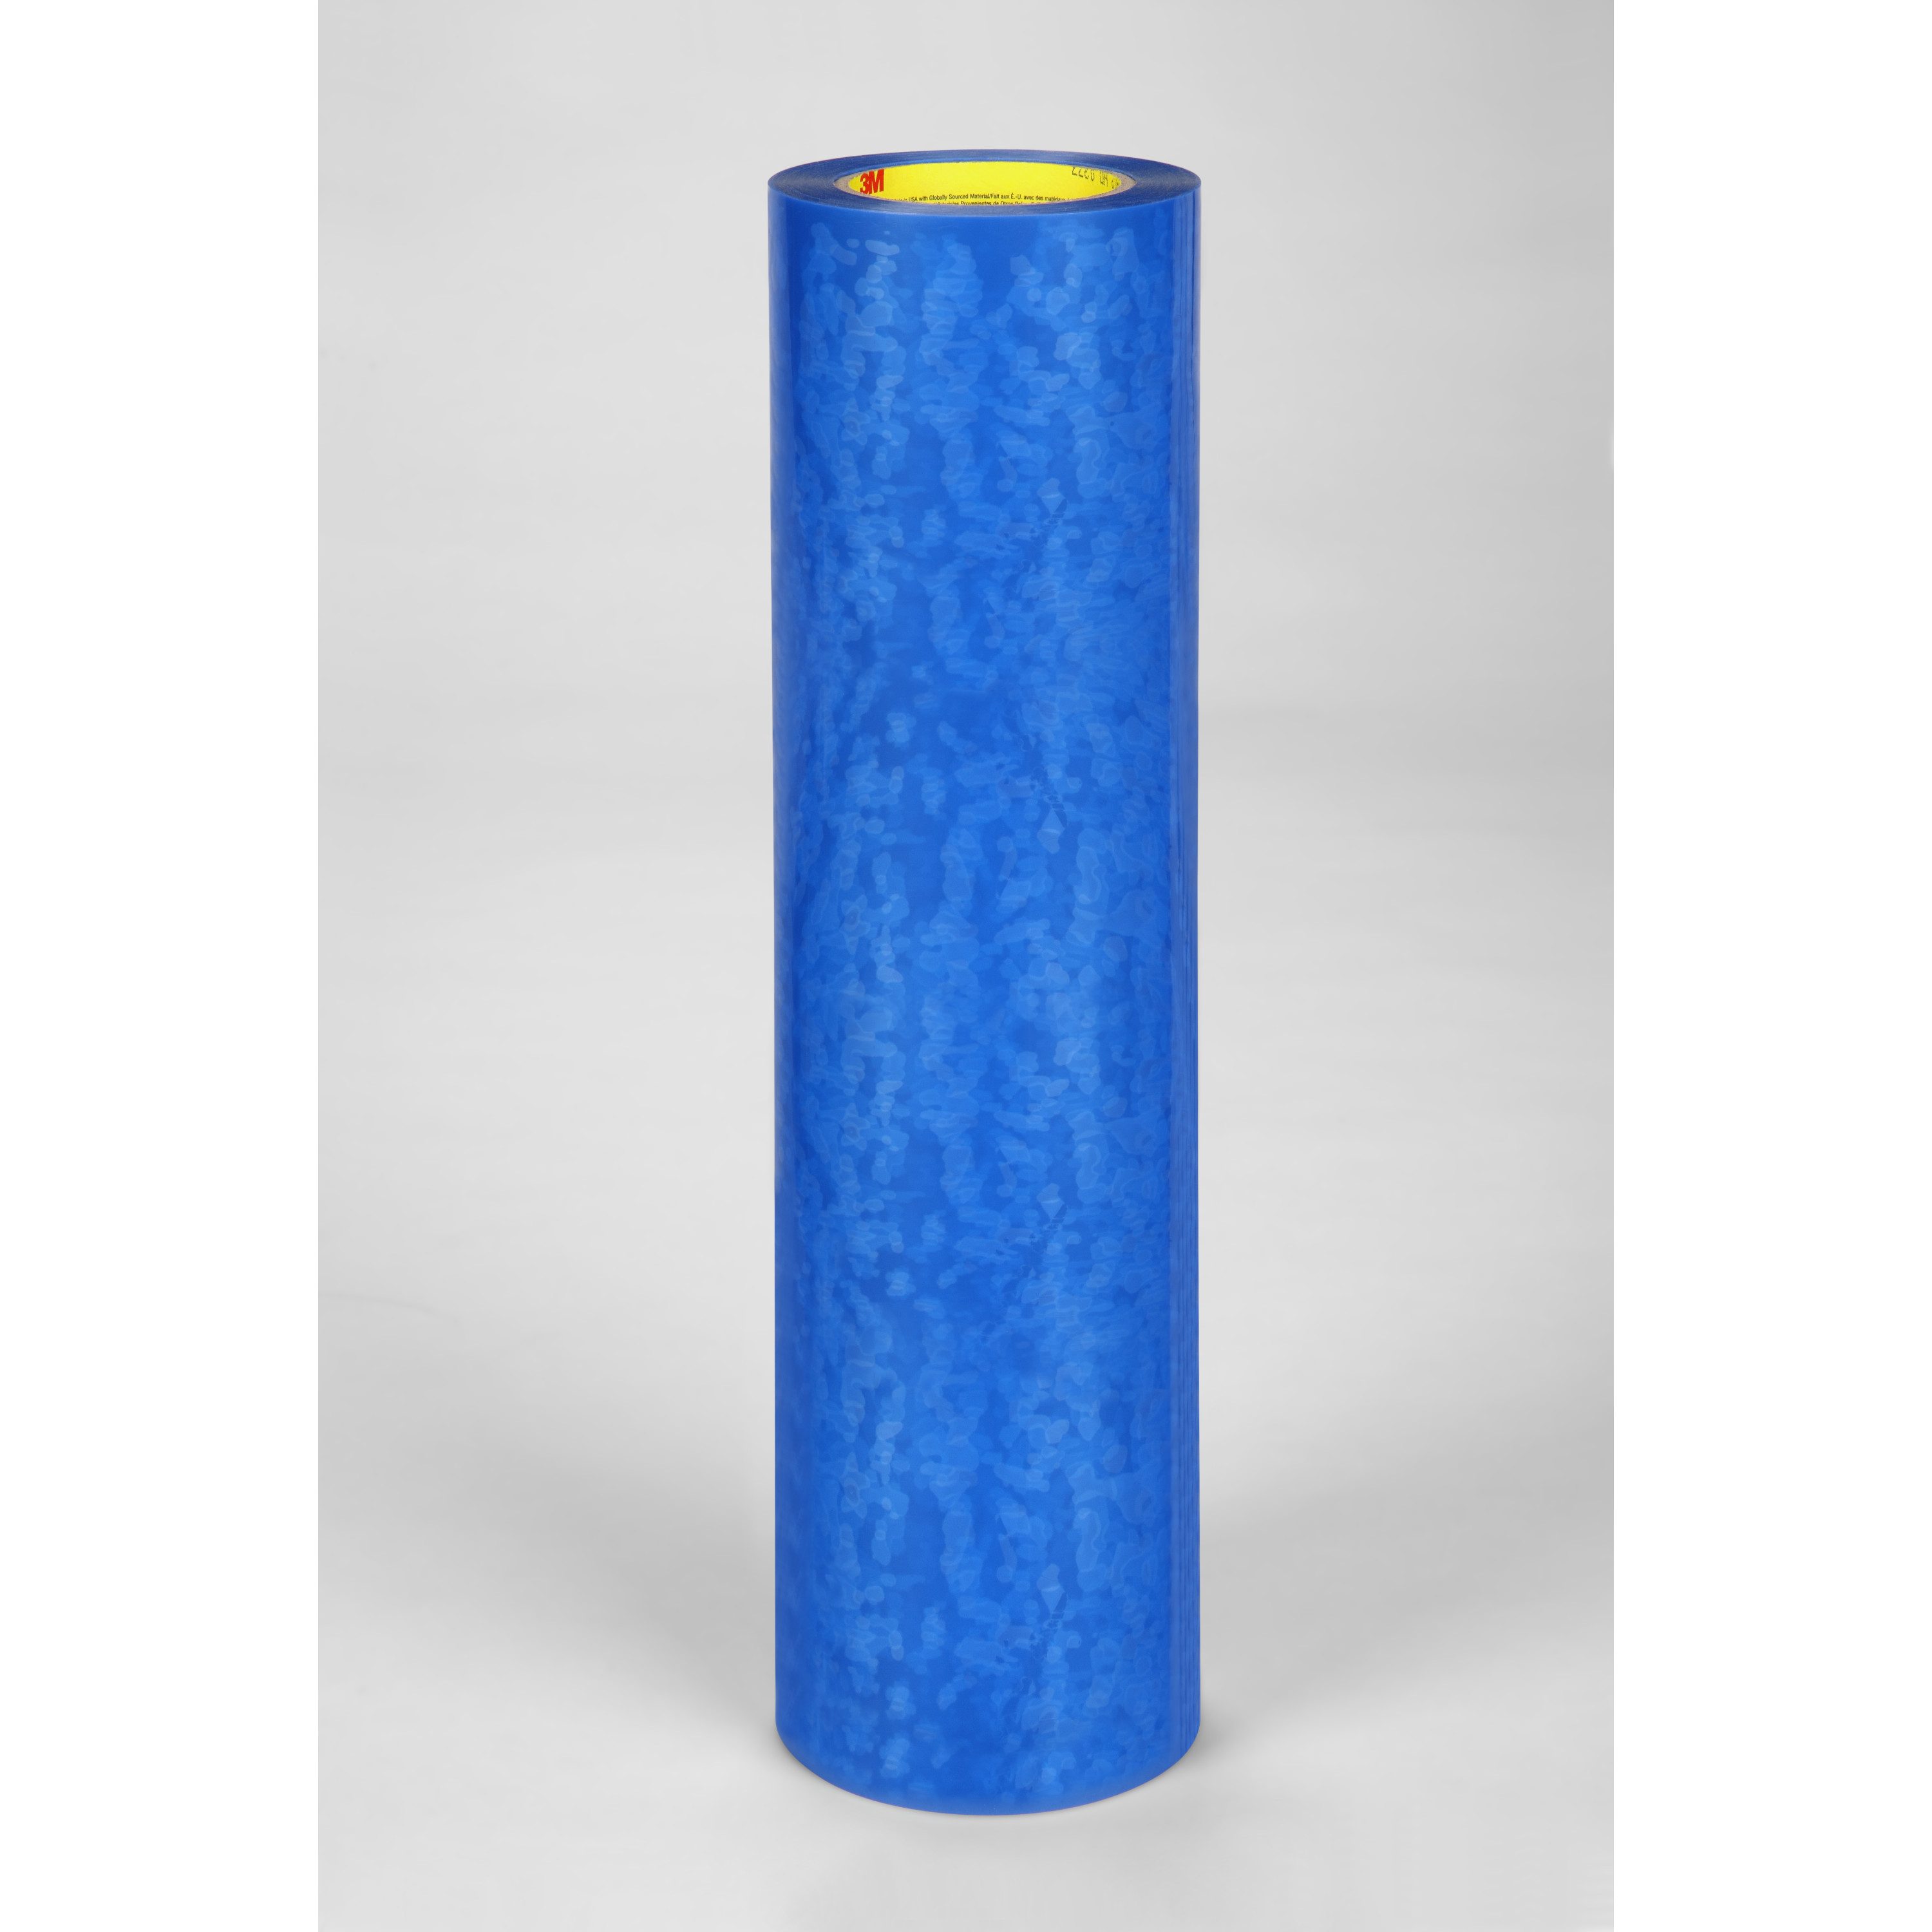 3M™ Polyester Tape 8902, Blue, 18 in x 72 yd, 3.4 mil, 2 rolls per case